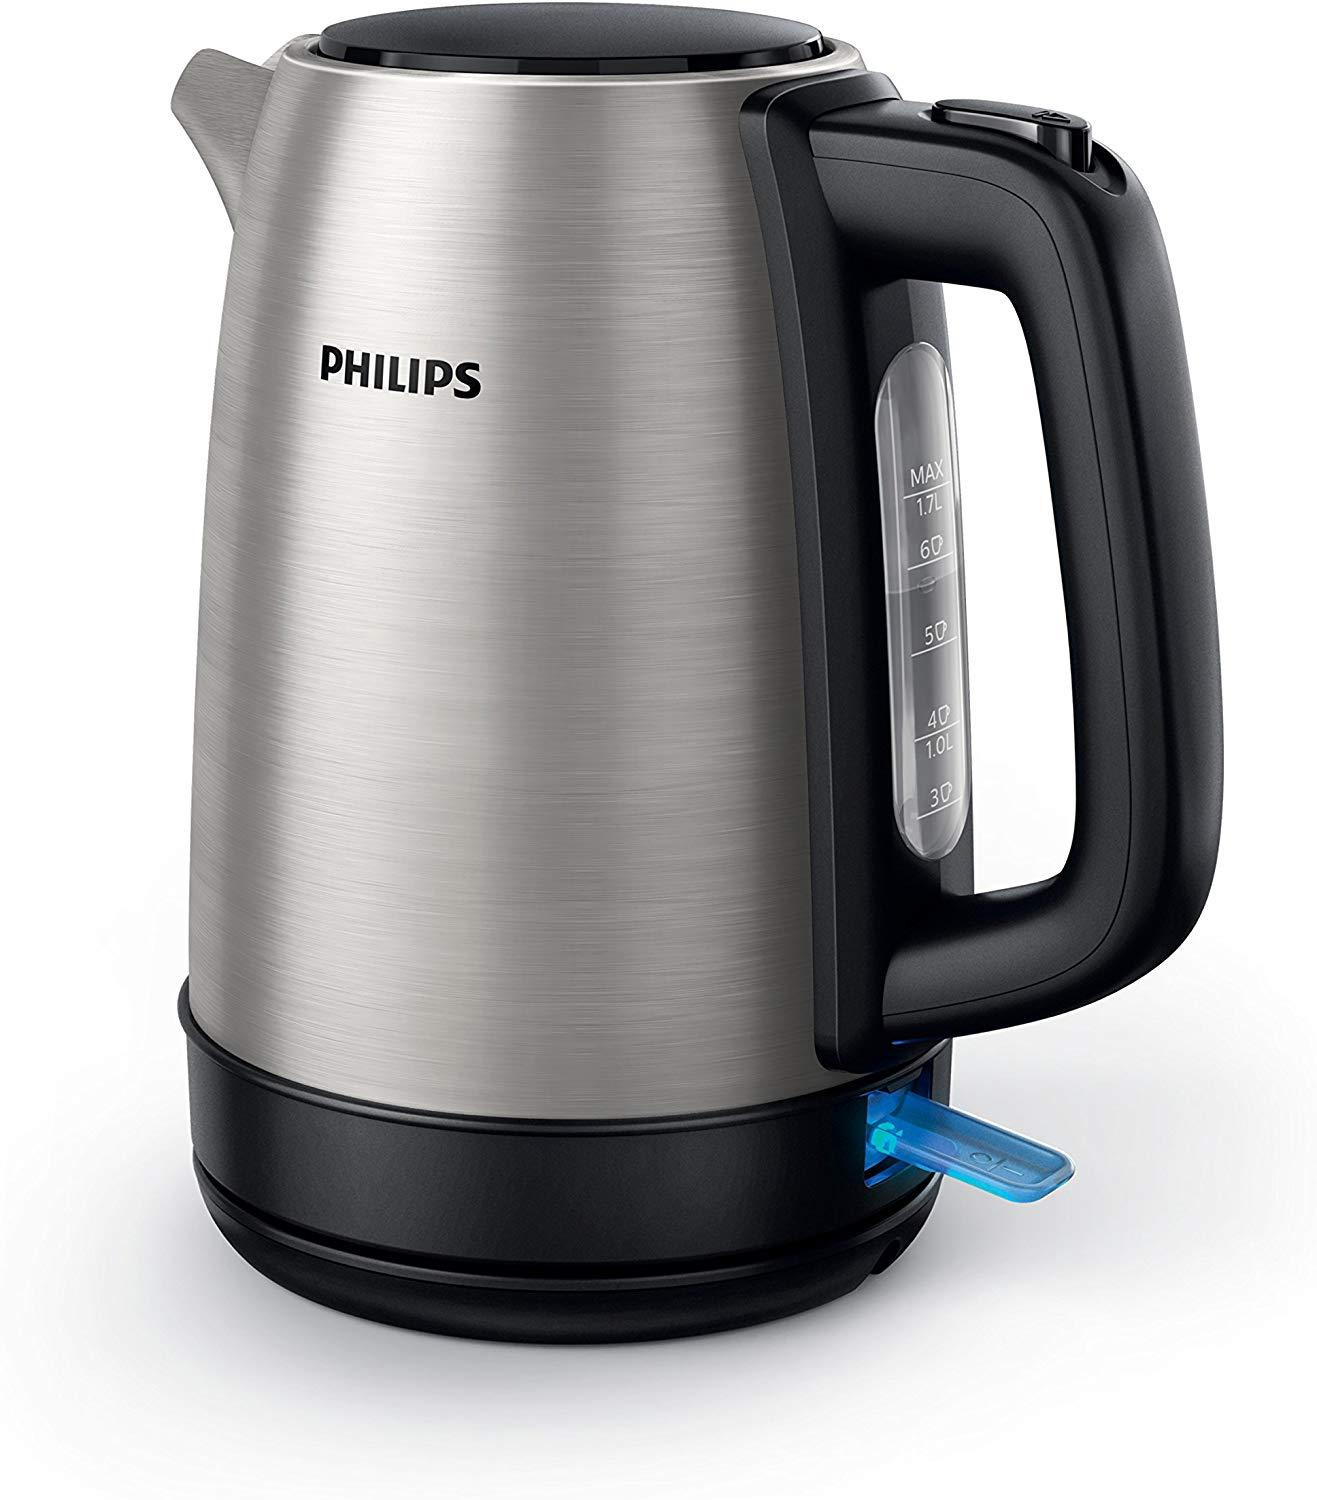 RUSSELL HOBBS 28080-70 Bouilloire 1,7l Structure, Ebullition